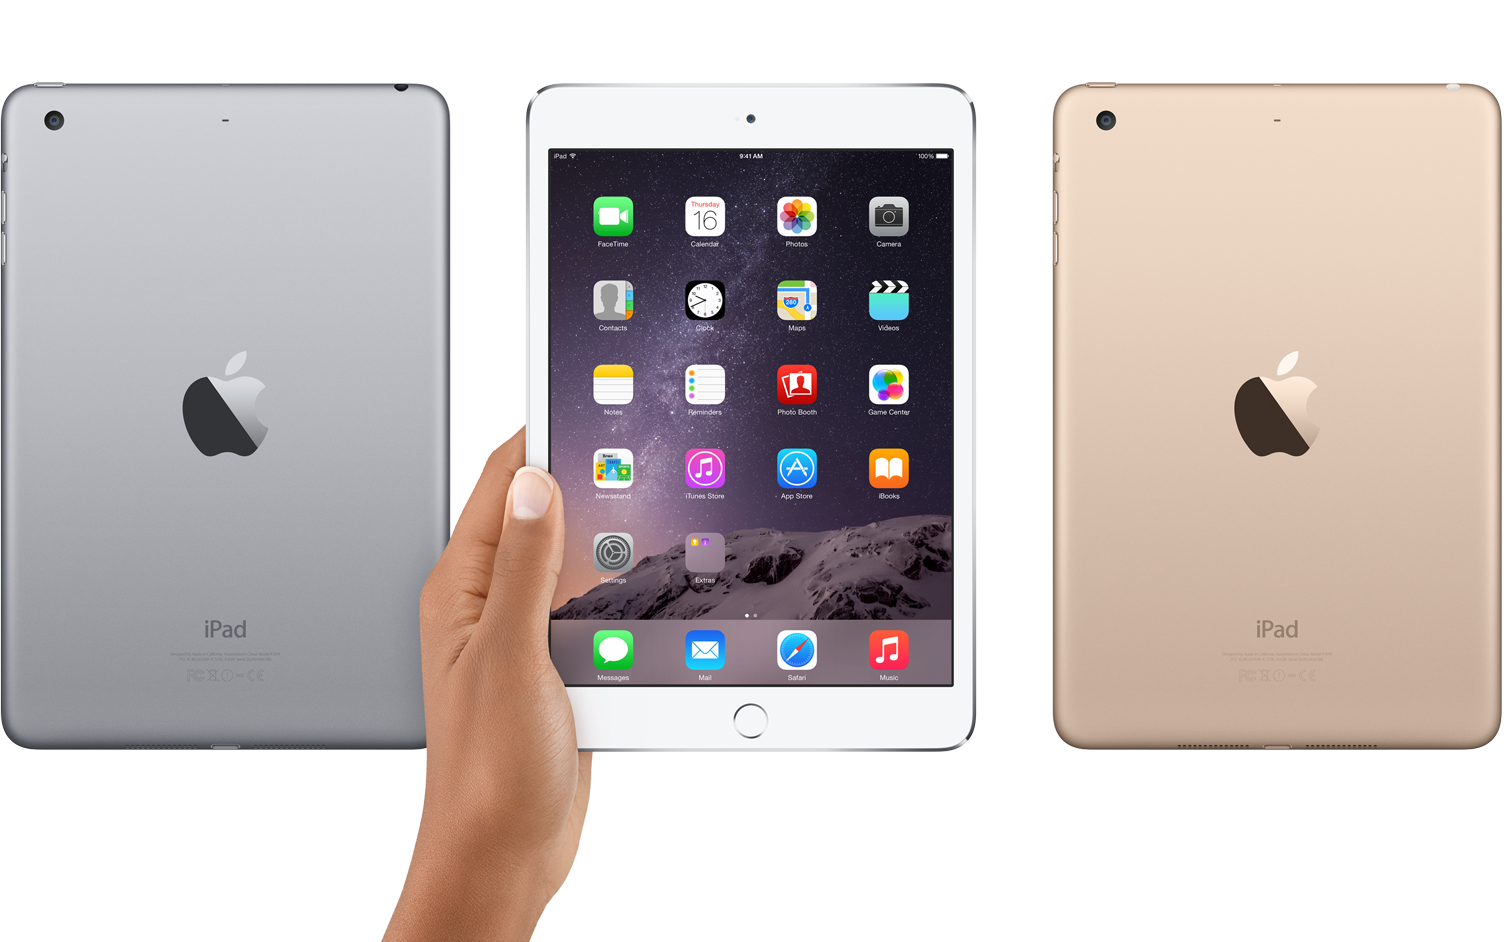 Apple thins out its iPads while fleshing out its lineup